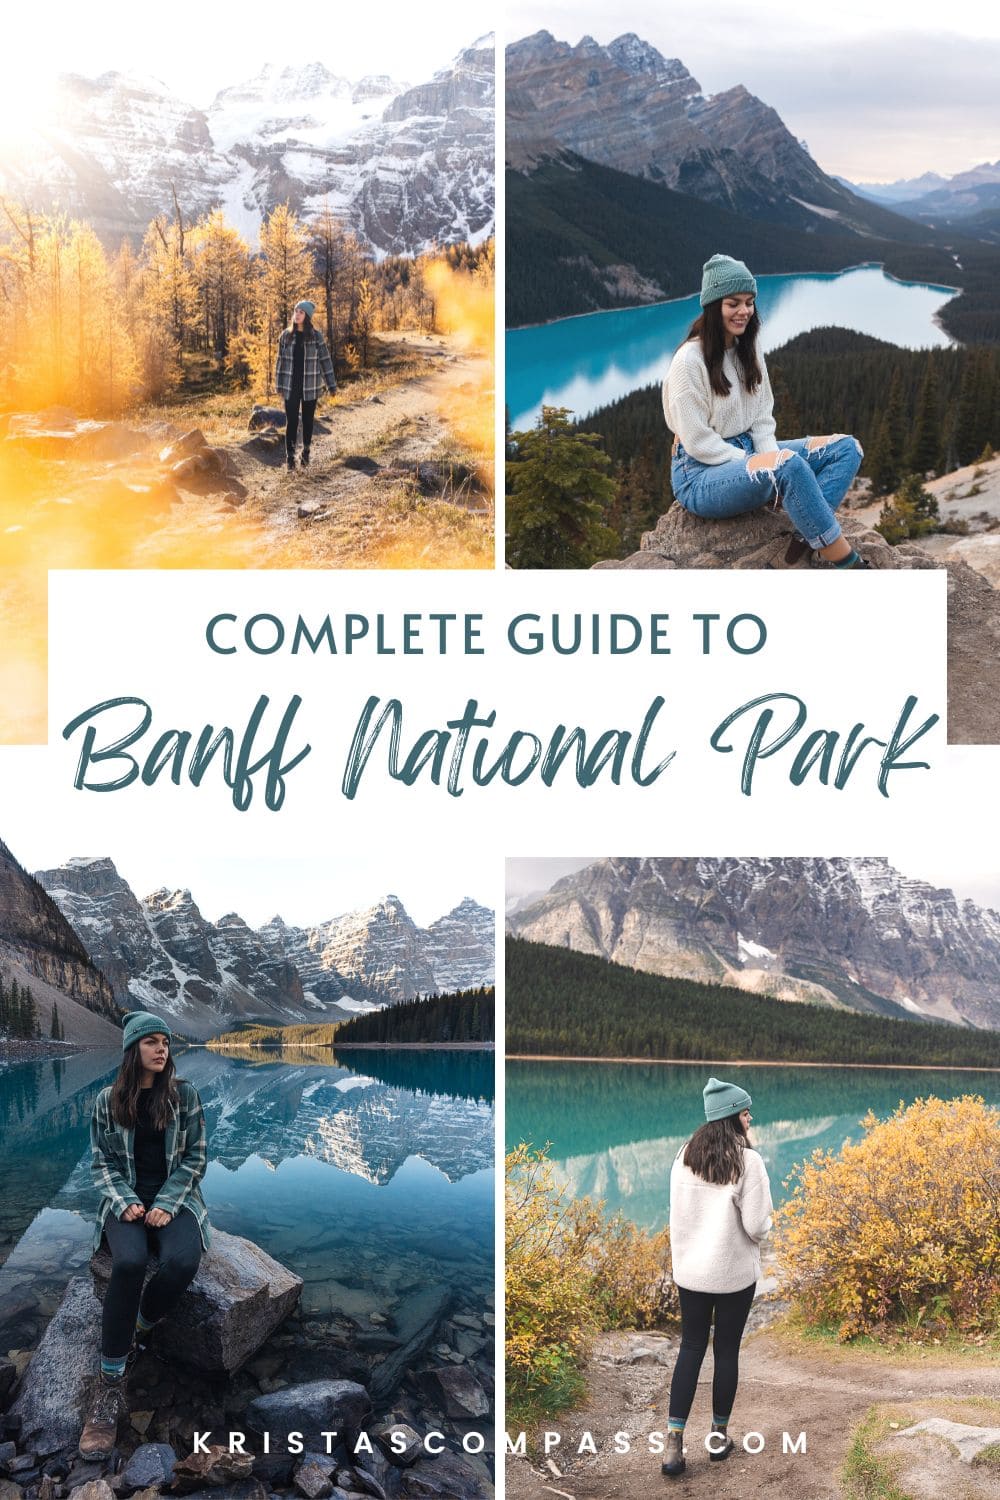 Here are the most epic things to do in Banff National Park during your trip to the Canadian Rockies! Take note of all the best hikes, sights and activities in Banff